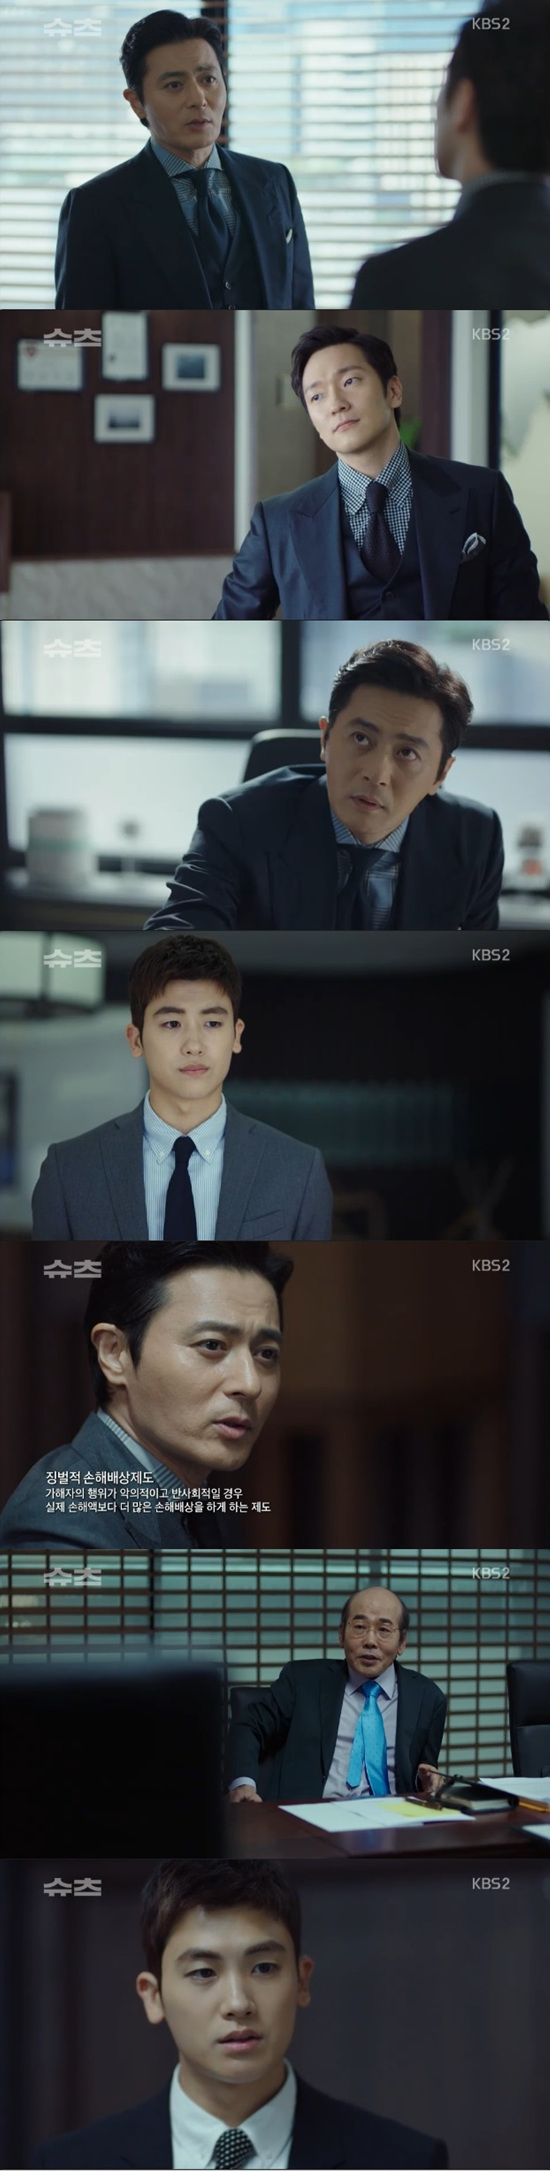 Park Hyung-sik hit DangerIn the 5th KBS 2TV drama Suits, which was broadcast on the 9th, Miniforce Seok (Jang Dong-gun) was shown to proceed with two lawsuits at the same time.On the same day, Miniforce will take over the lawsuit of Kim Dae-pyo, the husband of Kang Ha-yeon (Jin Hee-kyung) and representative of Yumi Pharmaceutical.Kim was involved in a lawsuit against patients who died of Lou Gehrigs disease.Kang could not take the case against Kim because of the class action lawsuits of Nokshi Chemical Victims, but a lawyer named David Kim came to Korea from Nokshi Chemical headquarters.David Kim wanted to deal with Miniforce, not Kang Ha-yeon.Miniforce decided to take on the Knox Chemical case after David Kim provoked the Moot court during Harvard.Miniforce Seok proceeded with two lawsuits at the same time, and Assault, Park Hyung-sik, was also busy.While Ko had to prepare for the Moot court, he also started investigating David Kim with the direction of Miniforce.David Kim offered to pay 10 million won to the Noxy Chemical Victims, who were always one step ahead of the Miniforce seat.Ko Yeon-woo gave a opinion to Miniforce that he should do it in a way that is not Miniforce style.Miniforce said he was worried that Victims would be shaken and that he would use company funds for Kang Ha-yeon.Ko Yeon-woo told Kang Ha-yeon that he had reached an agreement through prior consultation on the day of the Moot court, but the lawyer said that he had broken his promise to Ko Yeon-woo and was ready for all statements.Kang Ha-yeon asked Ko Yeon-woo if he had an agreement.Ko did not write an agreement with his lawyer. Kang confirmed that there was no agreement and proceeded with the Moot court.Photo = KBS Broadcasting Screen